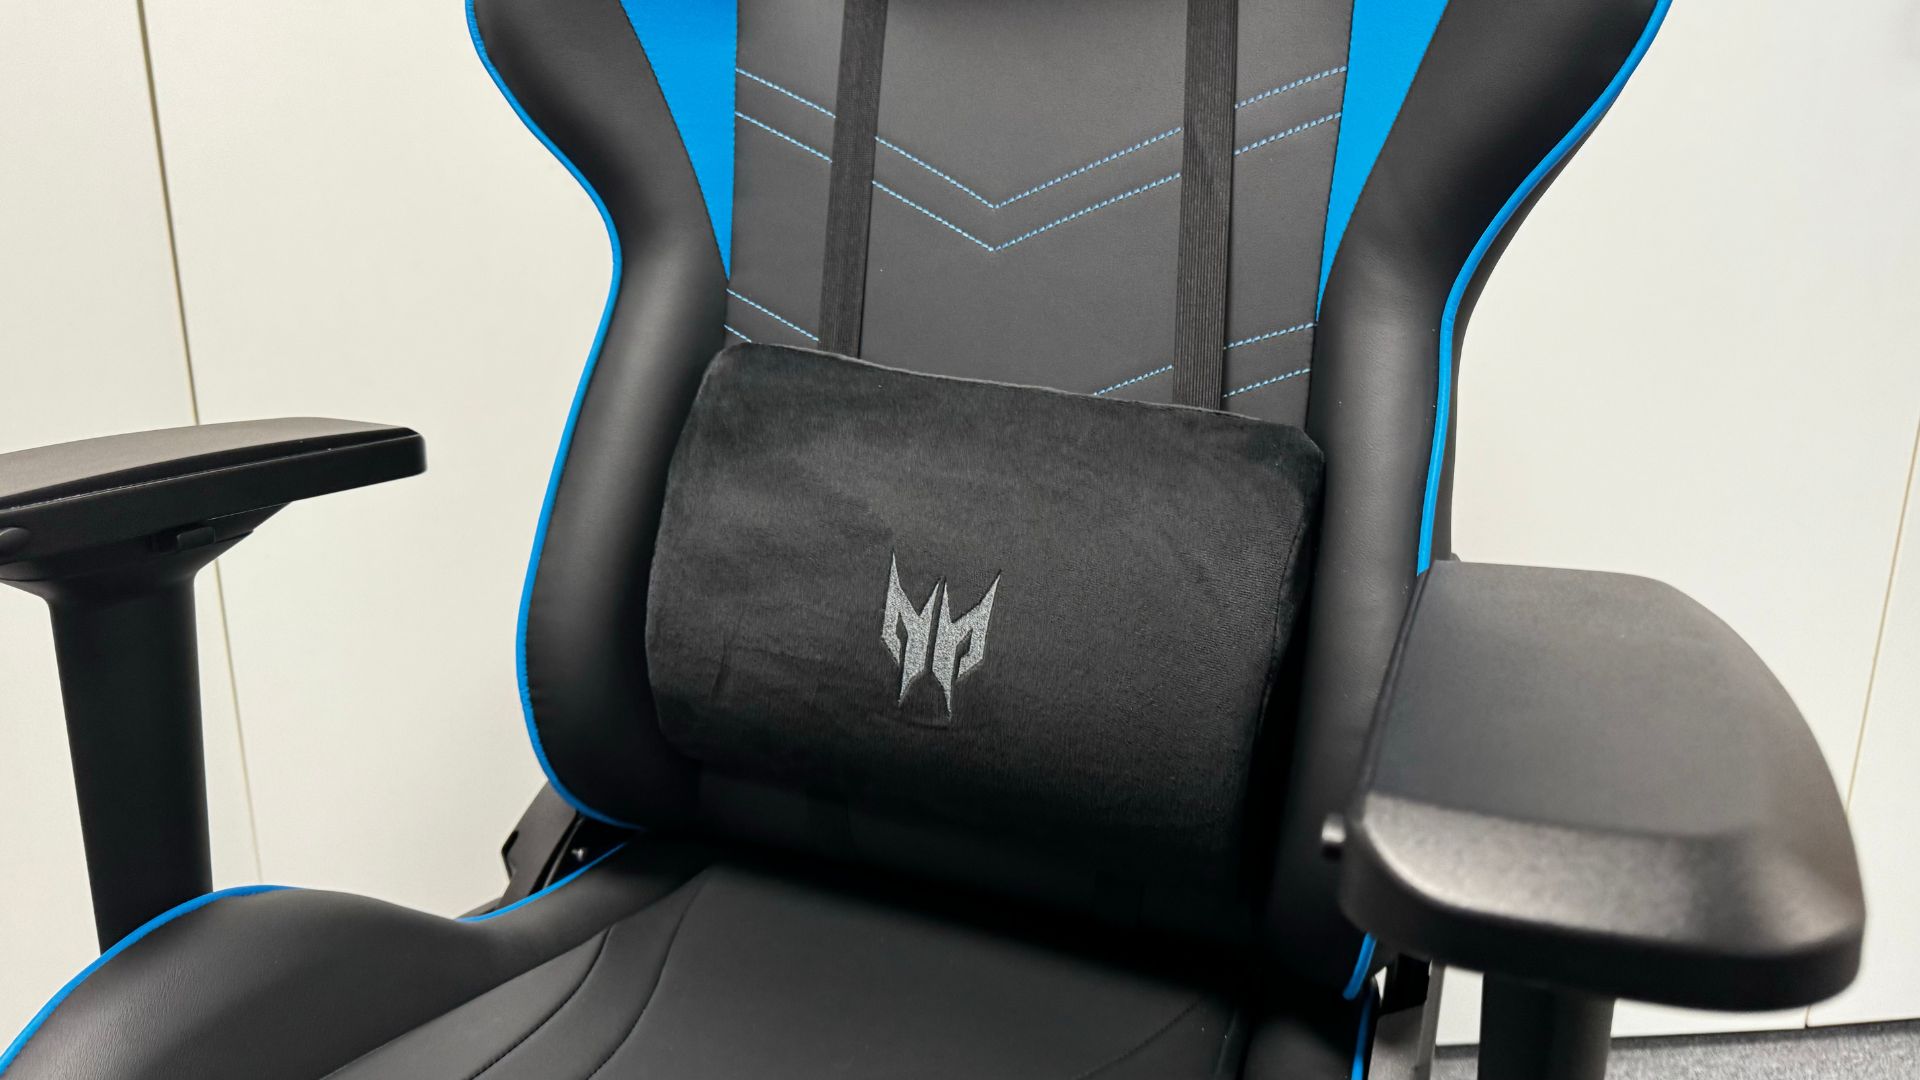 Acer Predator Rift review image of the lumbar support cushion on the chair